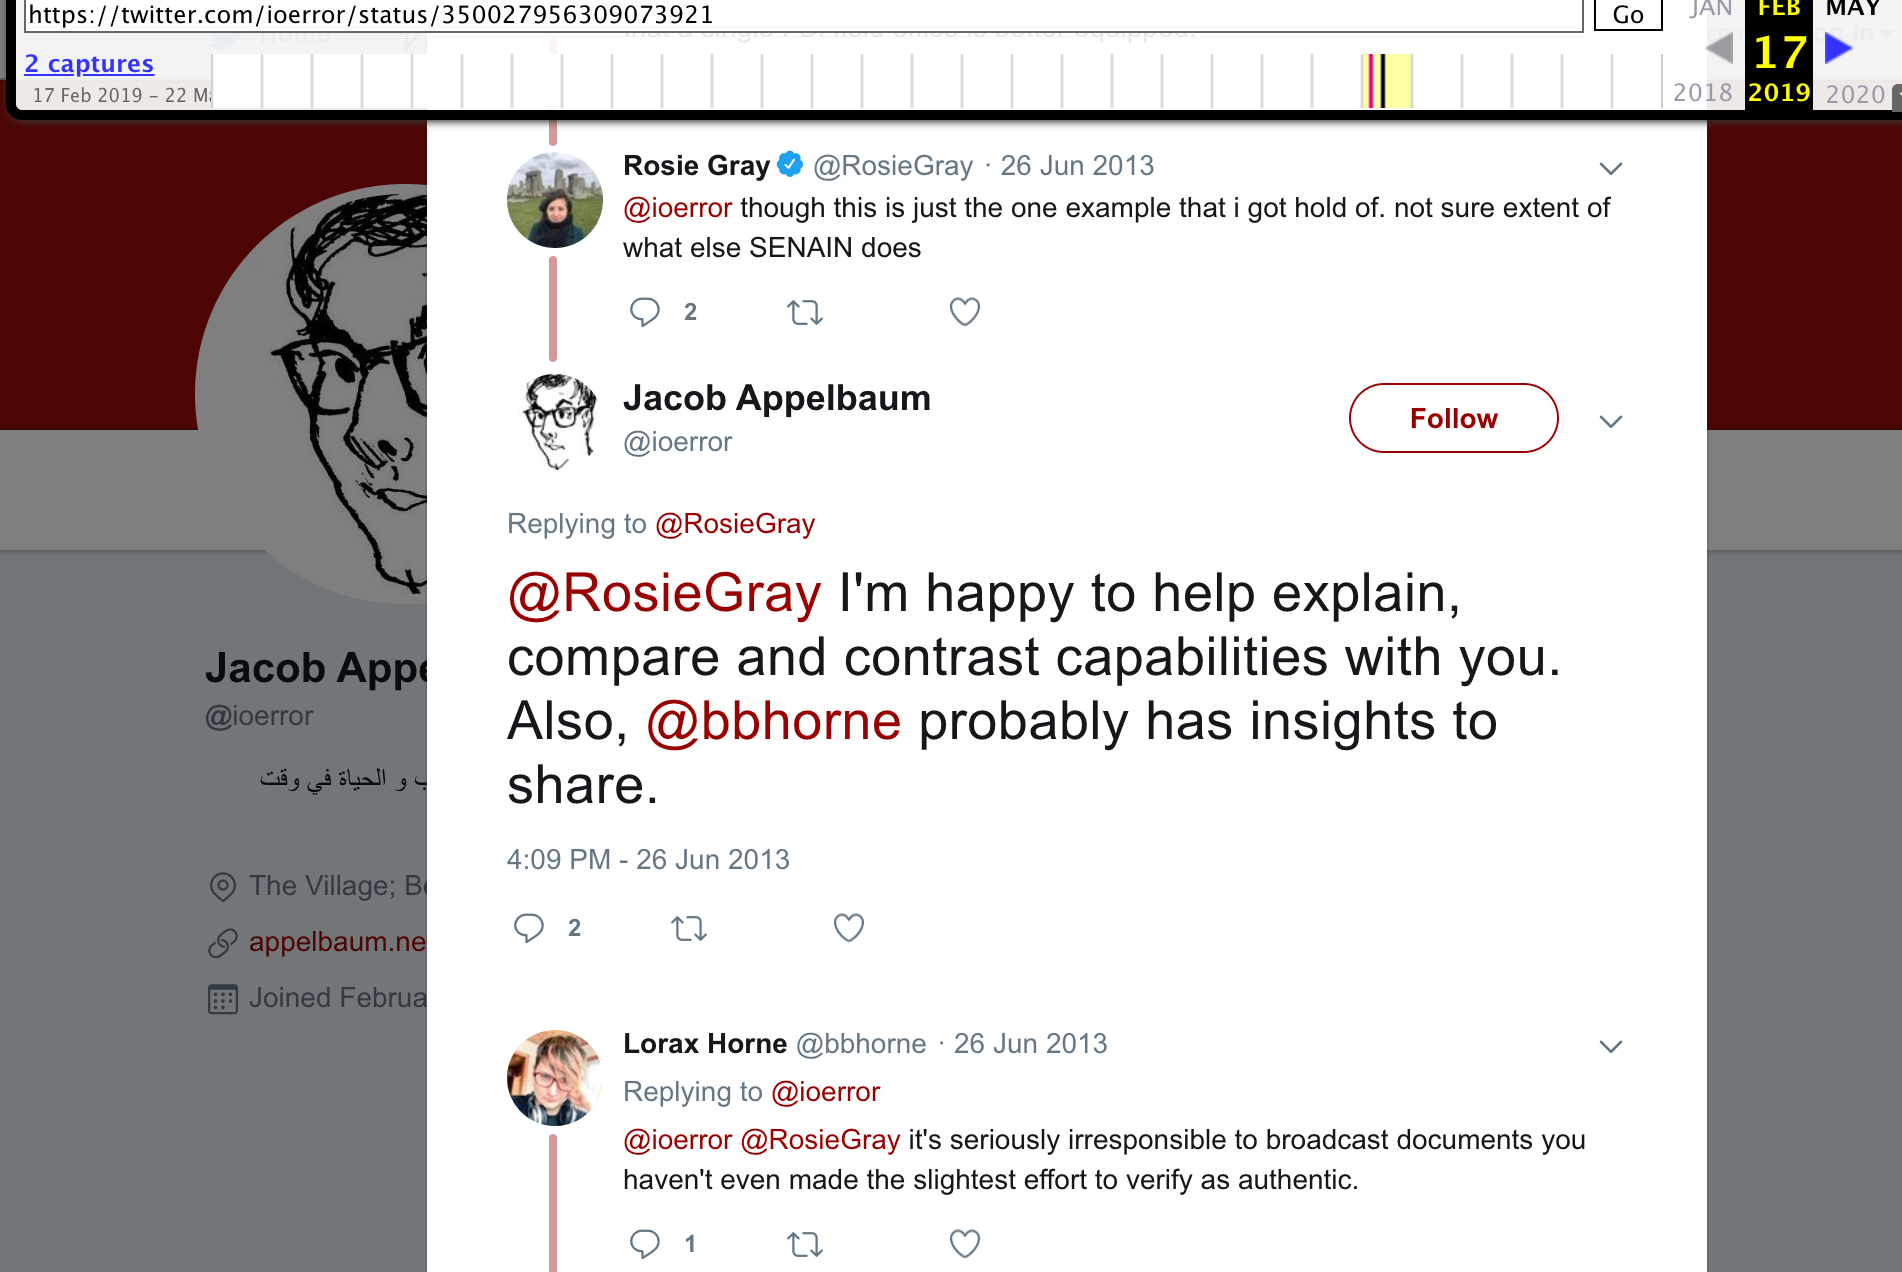 Archive.org snapshot of deleted tweets from @RosieGray on June 26, 2013. Part of a thread saying: "@ioerror though this is just the one example that i got hold of. not sure extent of what else SENAIN does." @ioerror Jacob Appelbaum replies: "@RosieGray I'm happy to help explain, compare and contrast capabilities with you. Also, @bbhorne probably has insights to share." I @bbhorne reply: "@ioerror @RosieGray It's seriously irresponsible to broadcast docuemtns you haven't even made the slightest effort to verify as authentic."